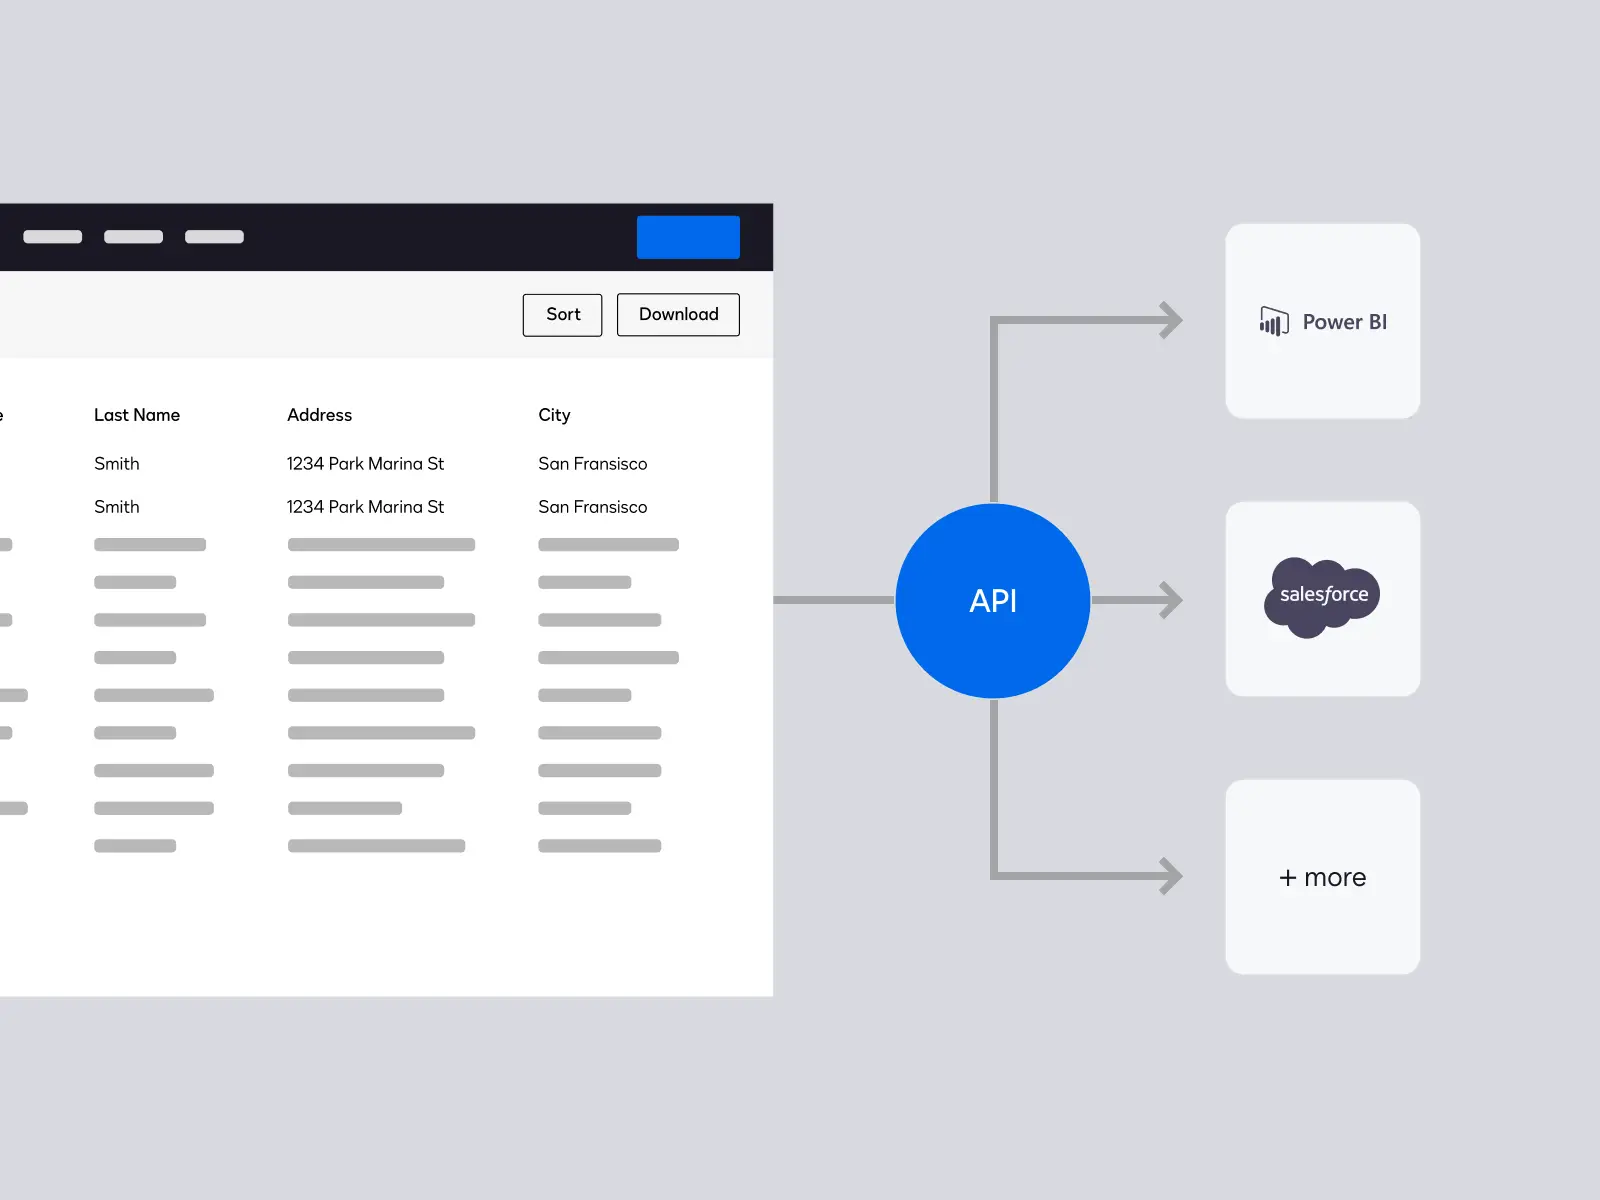 DocuSign Web Forms can connect with Salesforce, Power BI and other business applications through an API.